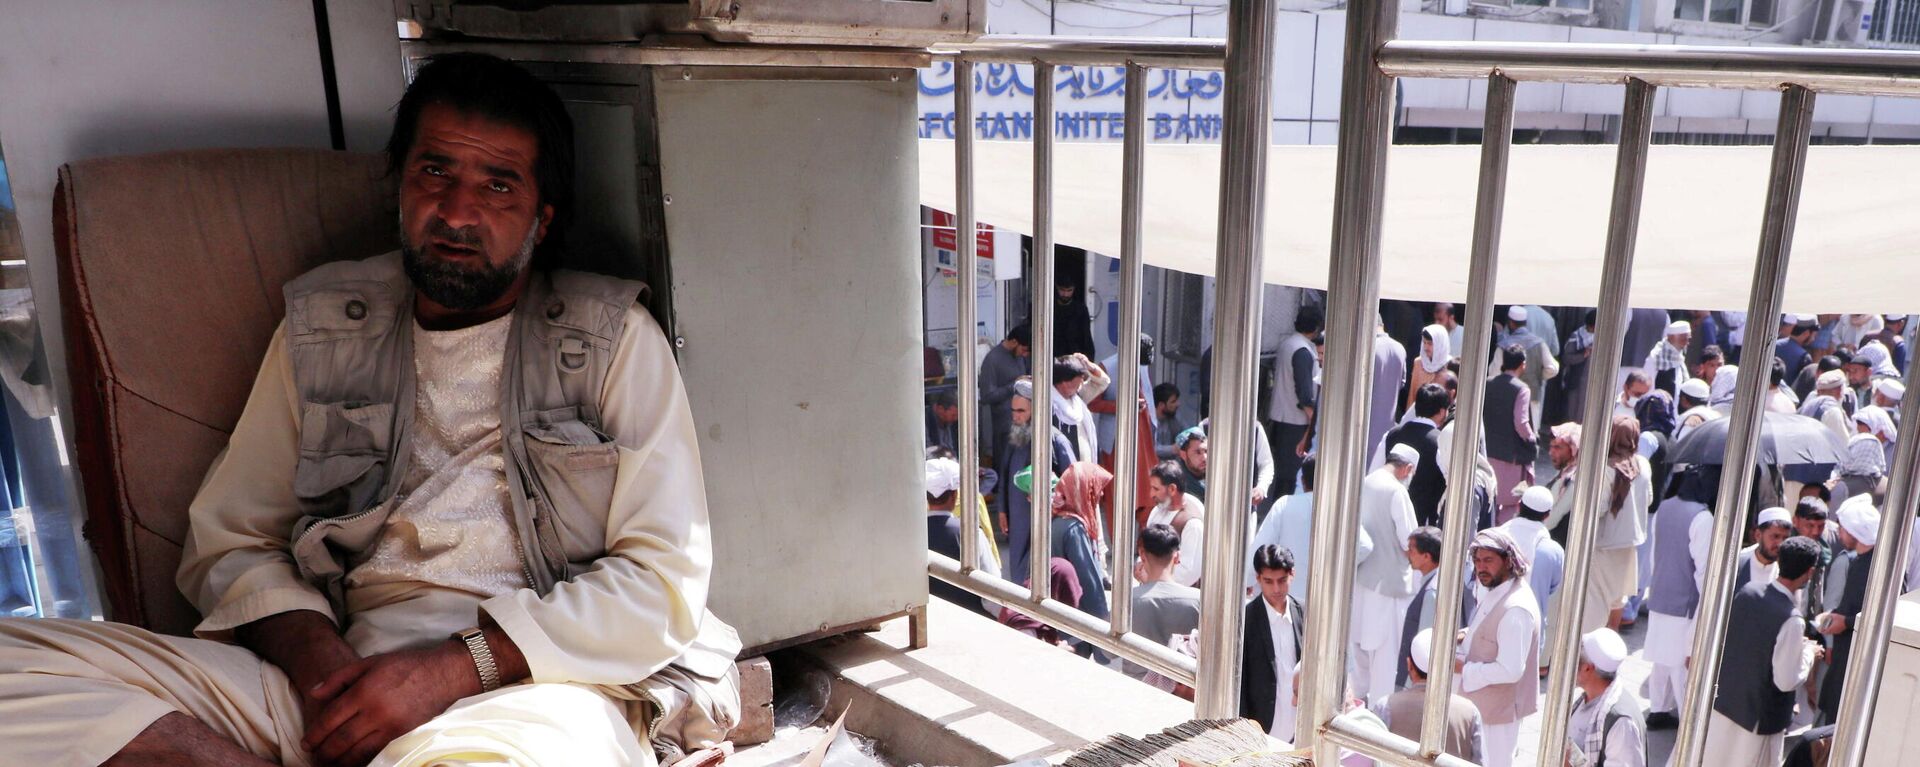 An Afghan money exchange dealer waits for customers at a money exchange market, following banks and markets reopening after the Taliban took over in Kabul, Afghanistan, September 4, 2021 - Sputnik International, 1920, 27.09.2021